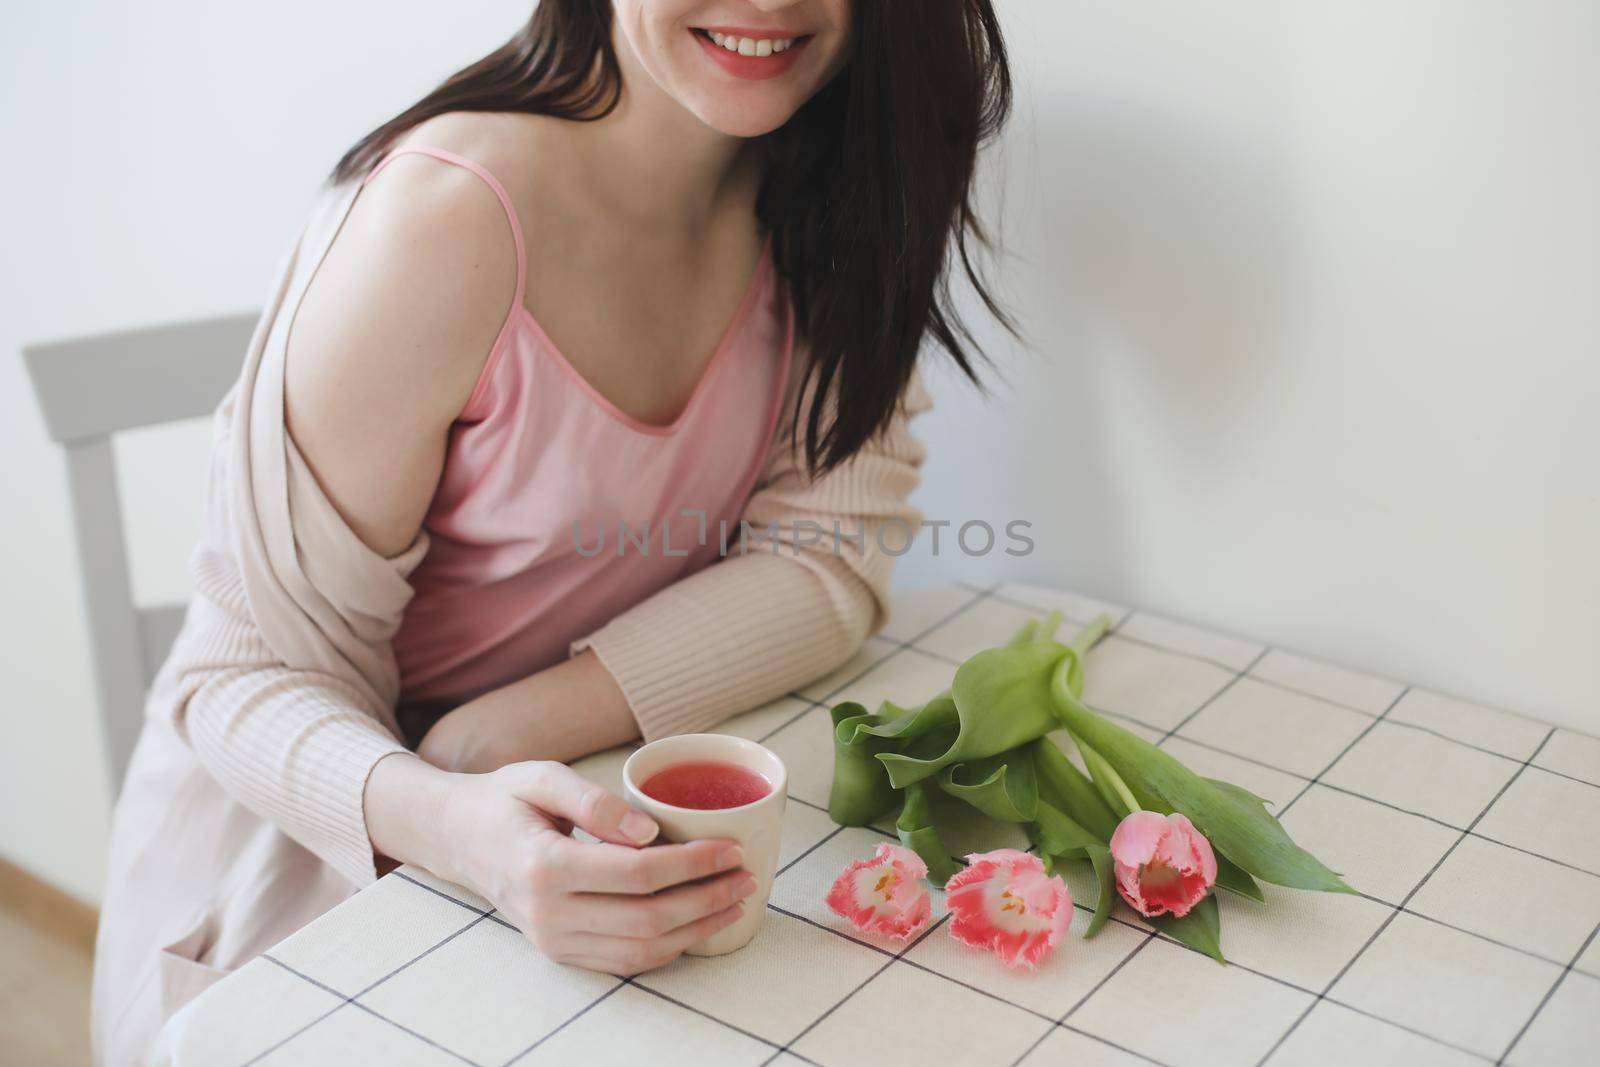 romantic tender portrait of a young woman with pink fresh tulips